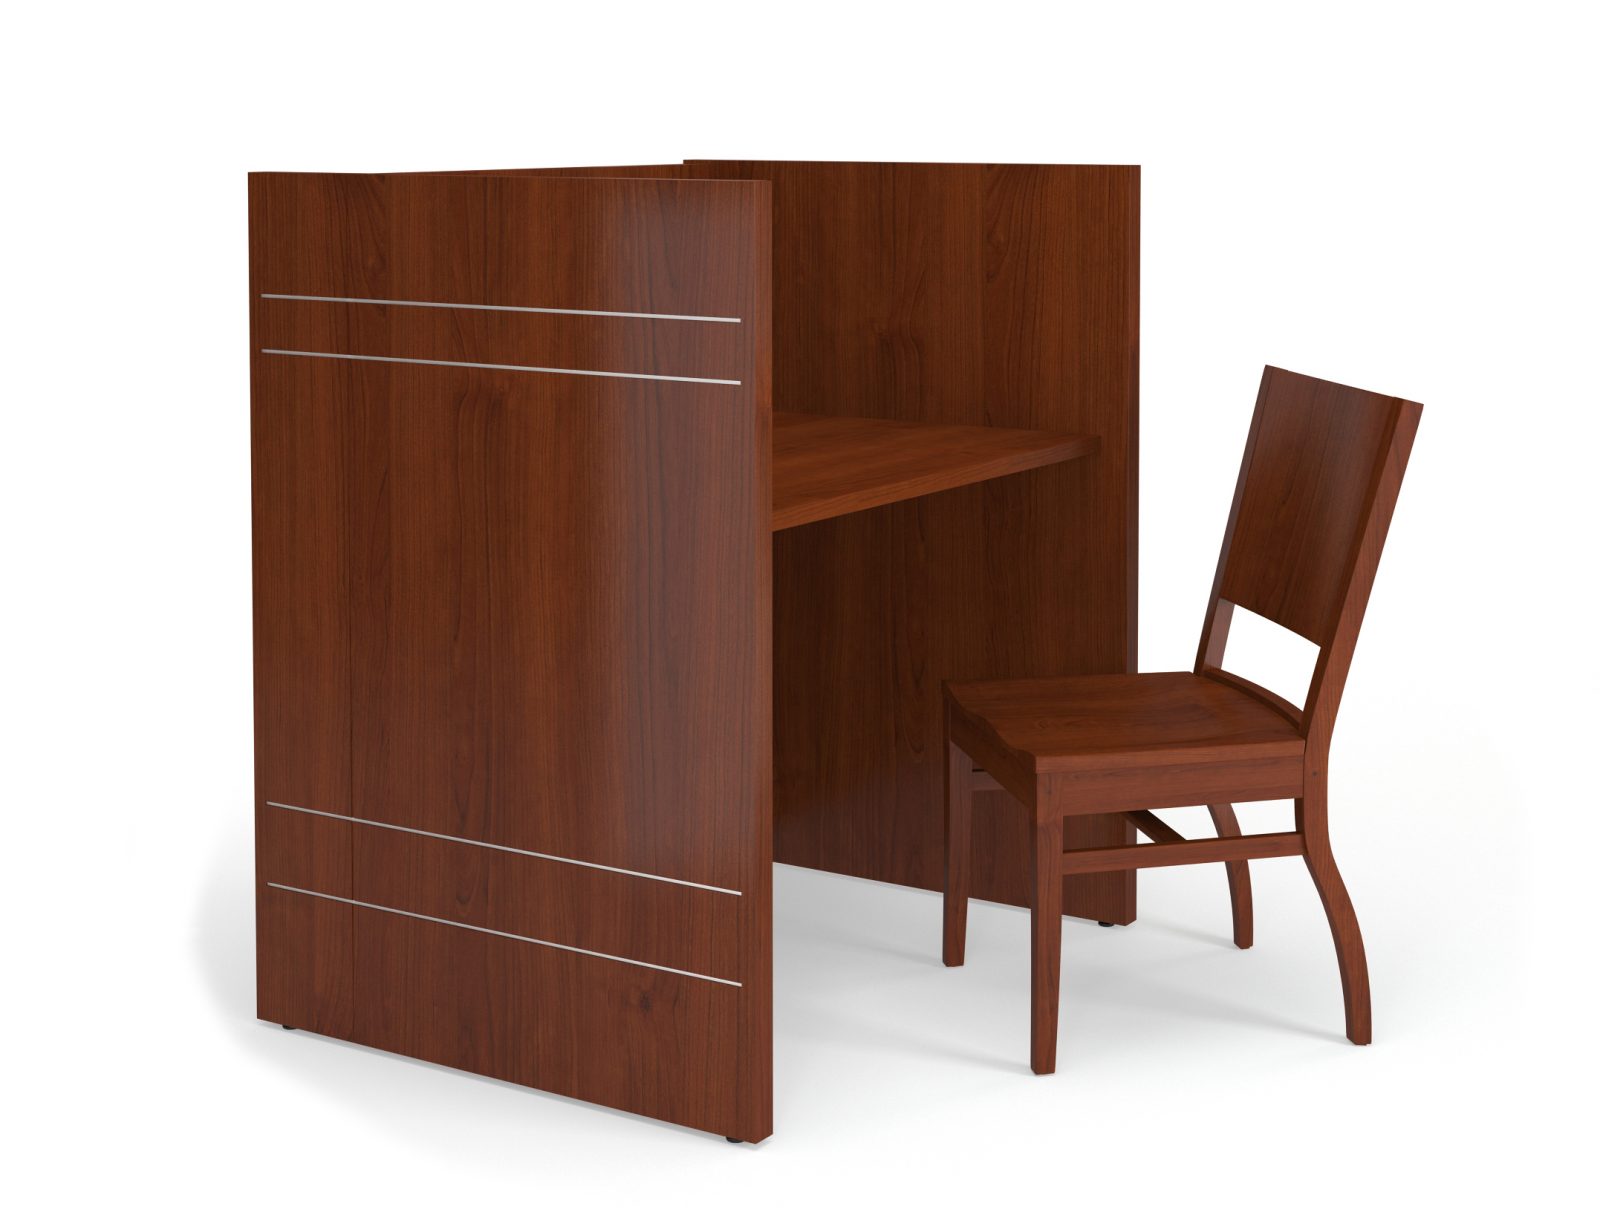 Wood Study Carrel with Seat for Libraries and Universities